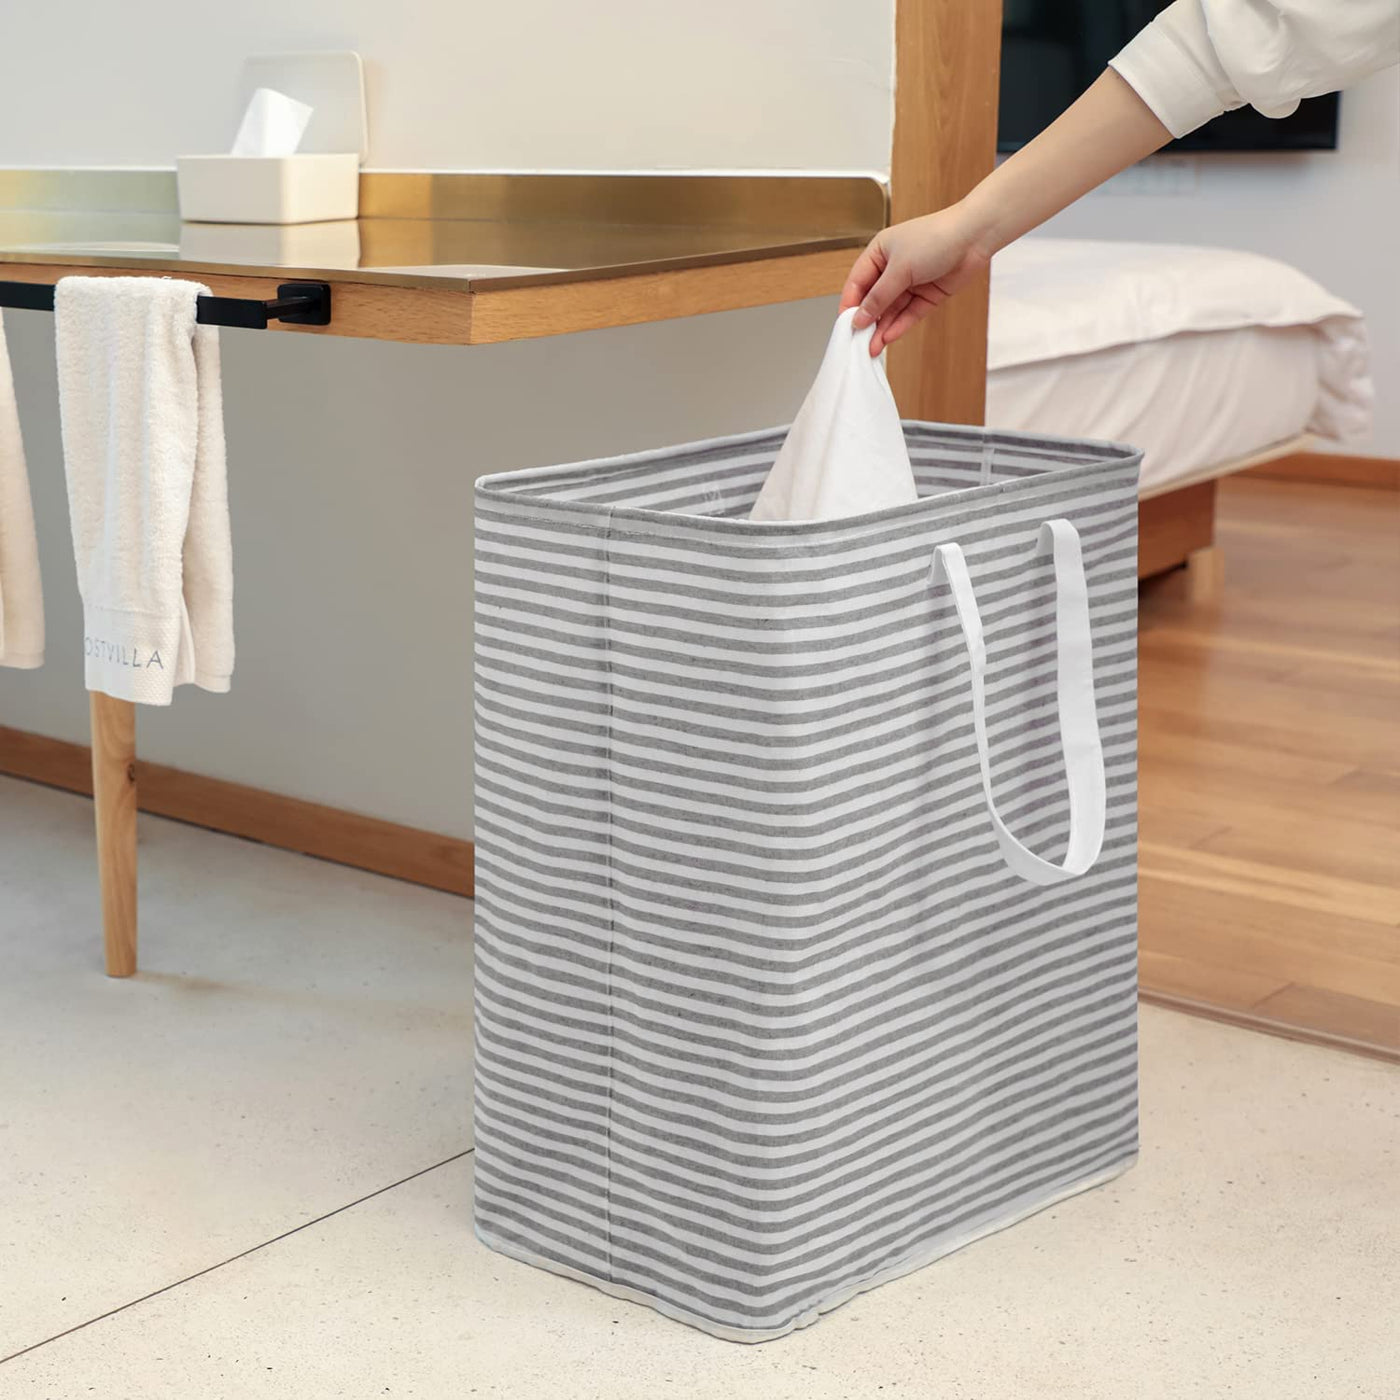 Waterproof Laundry Hamper Collapsible Baskets with Easy Carry Handles Large - White Grey Stripe